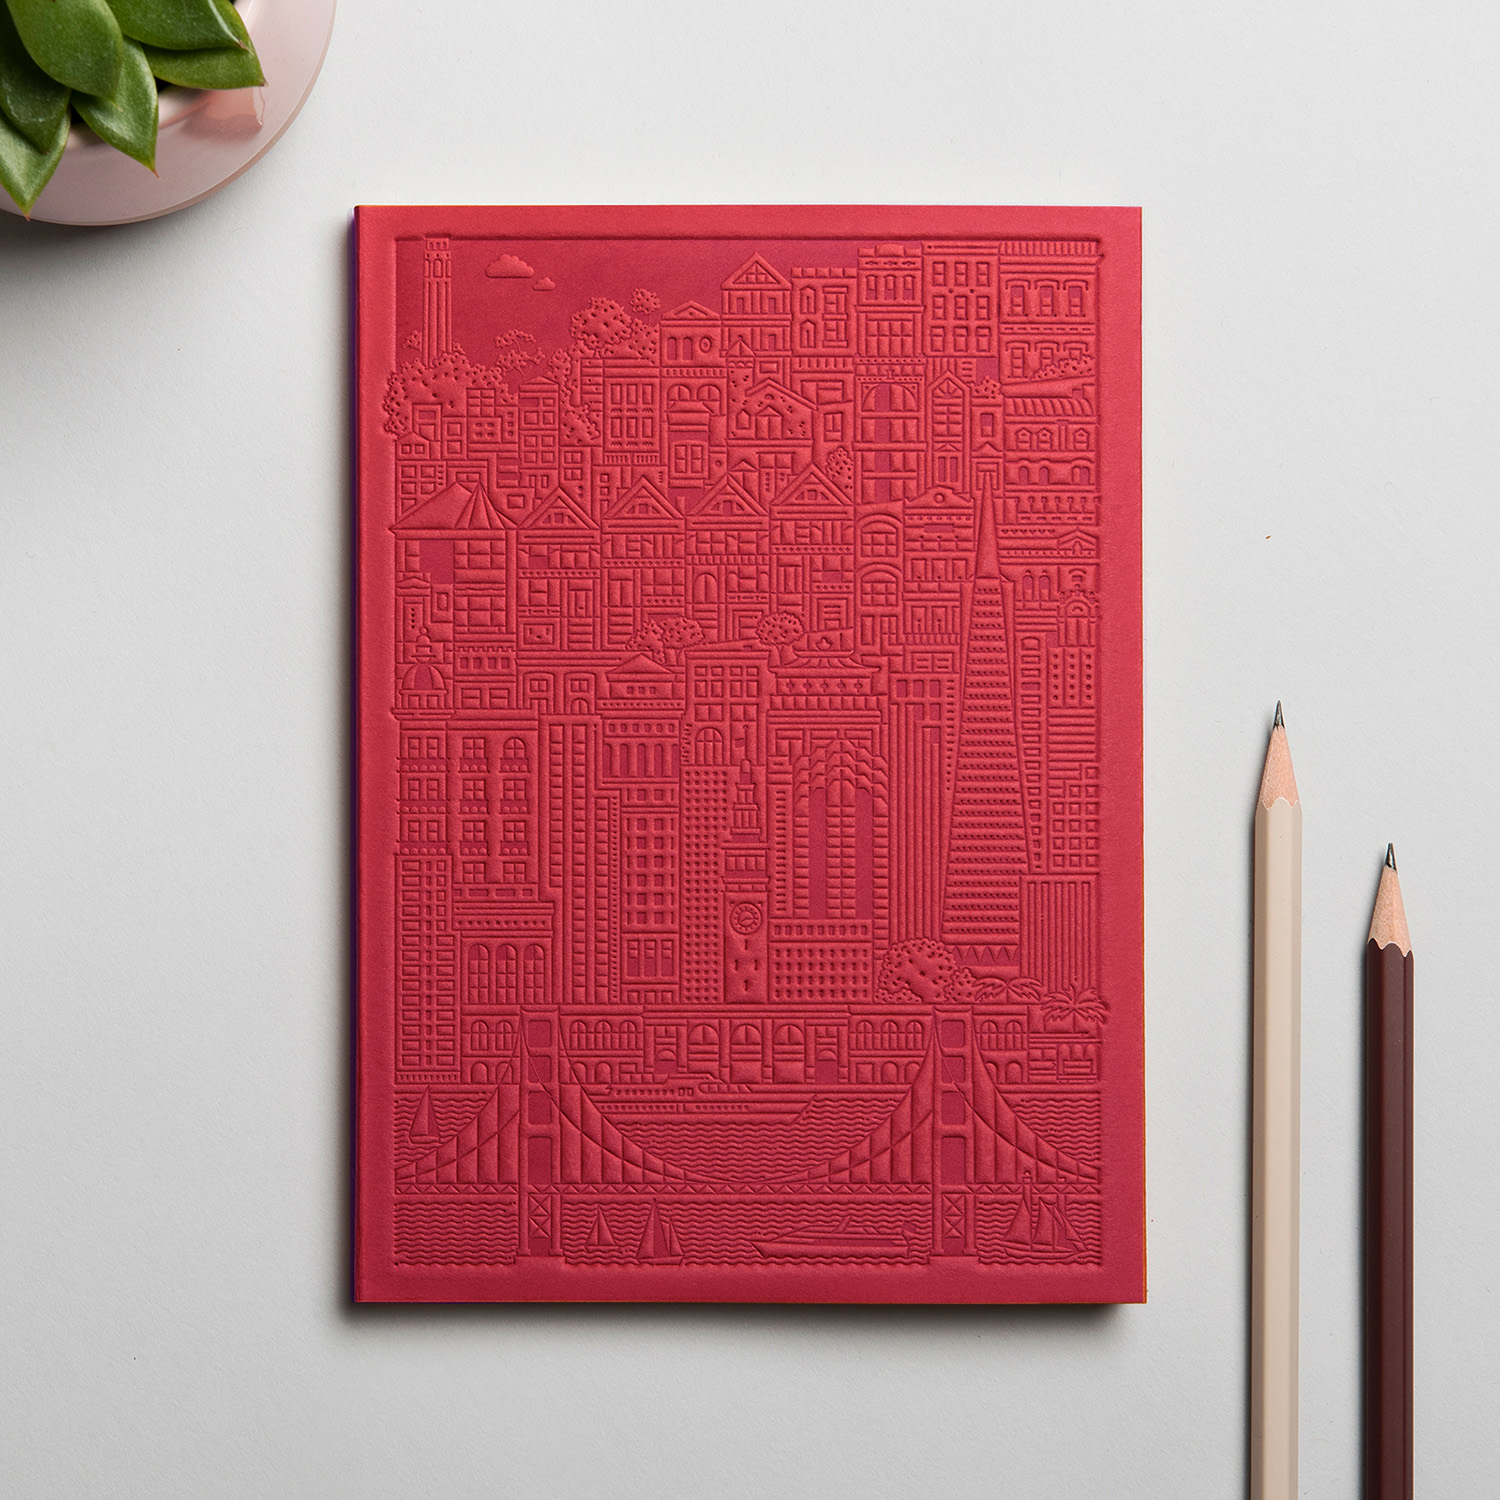 SanFrancisco Notebook by The City Works